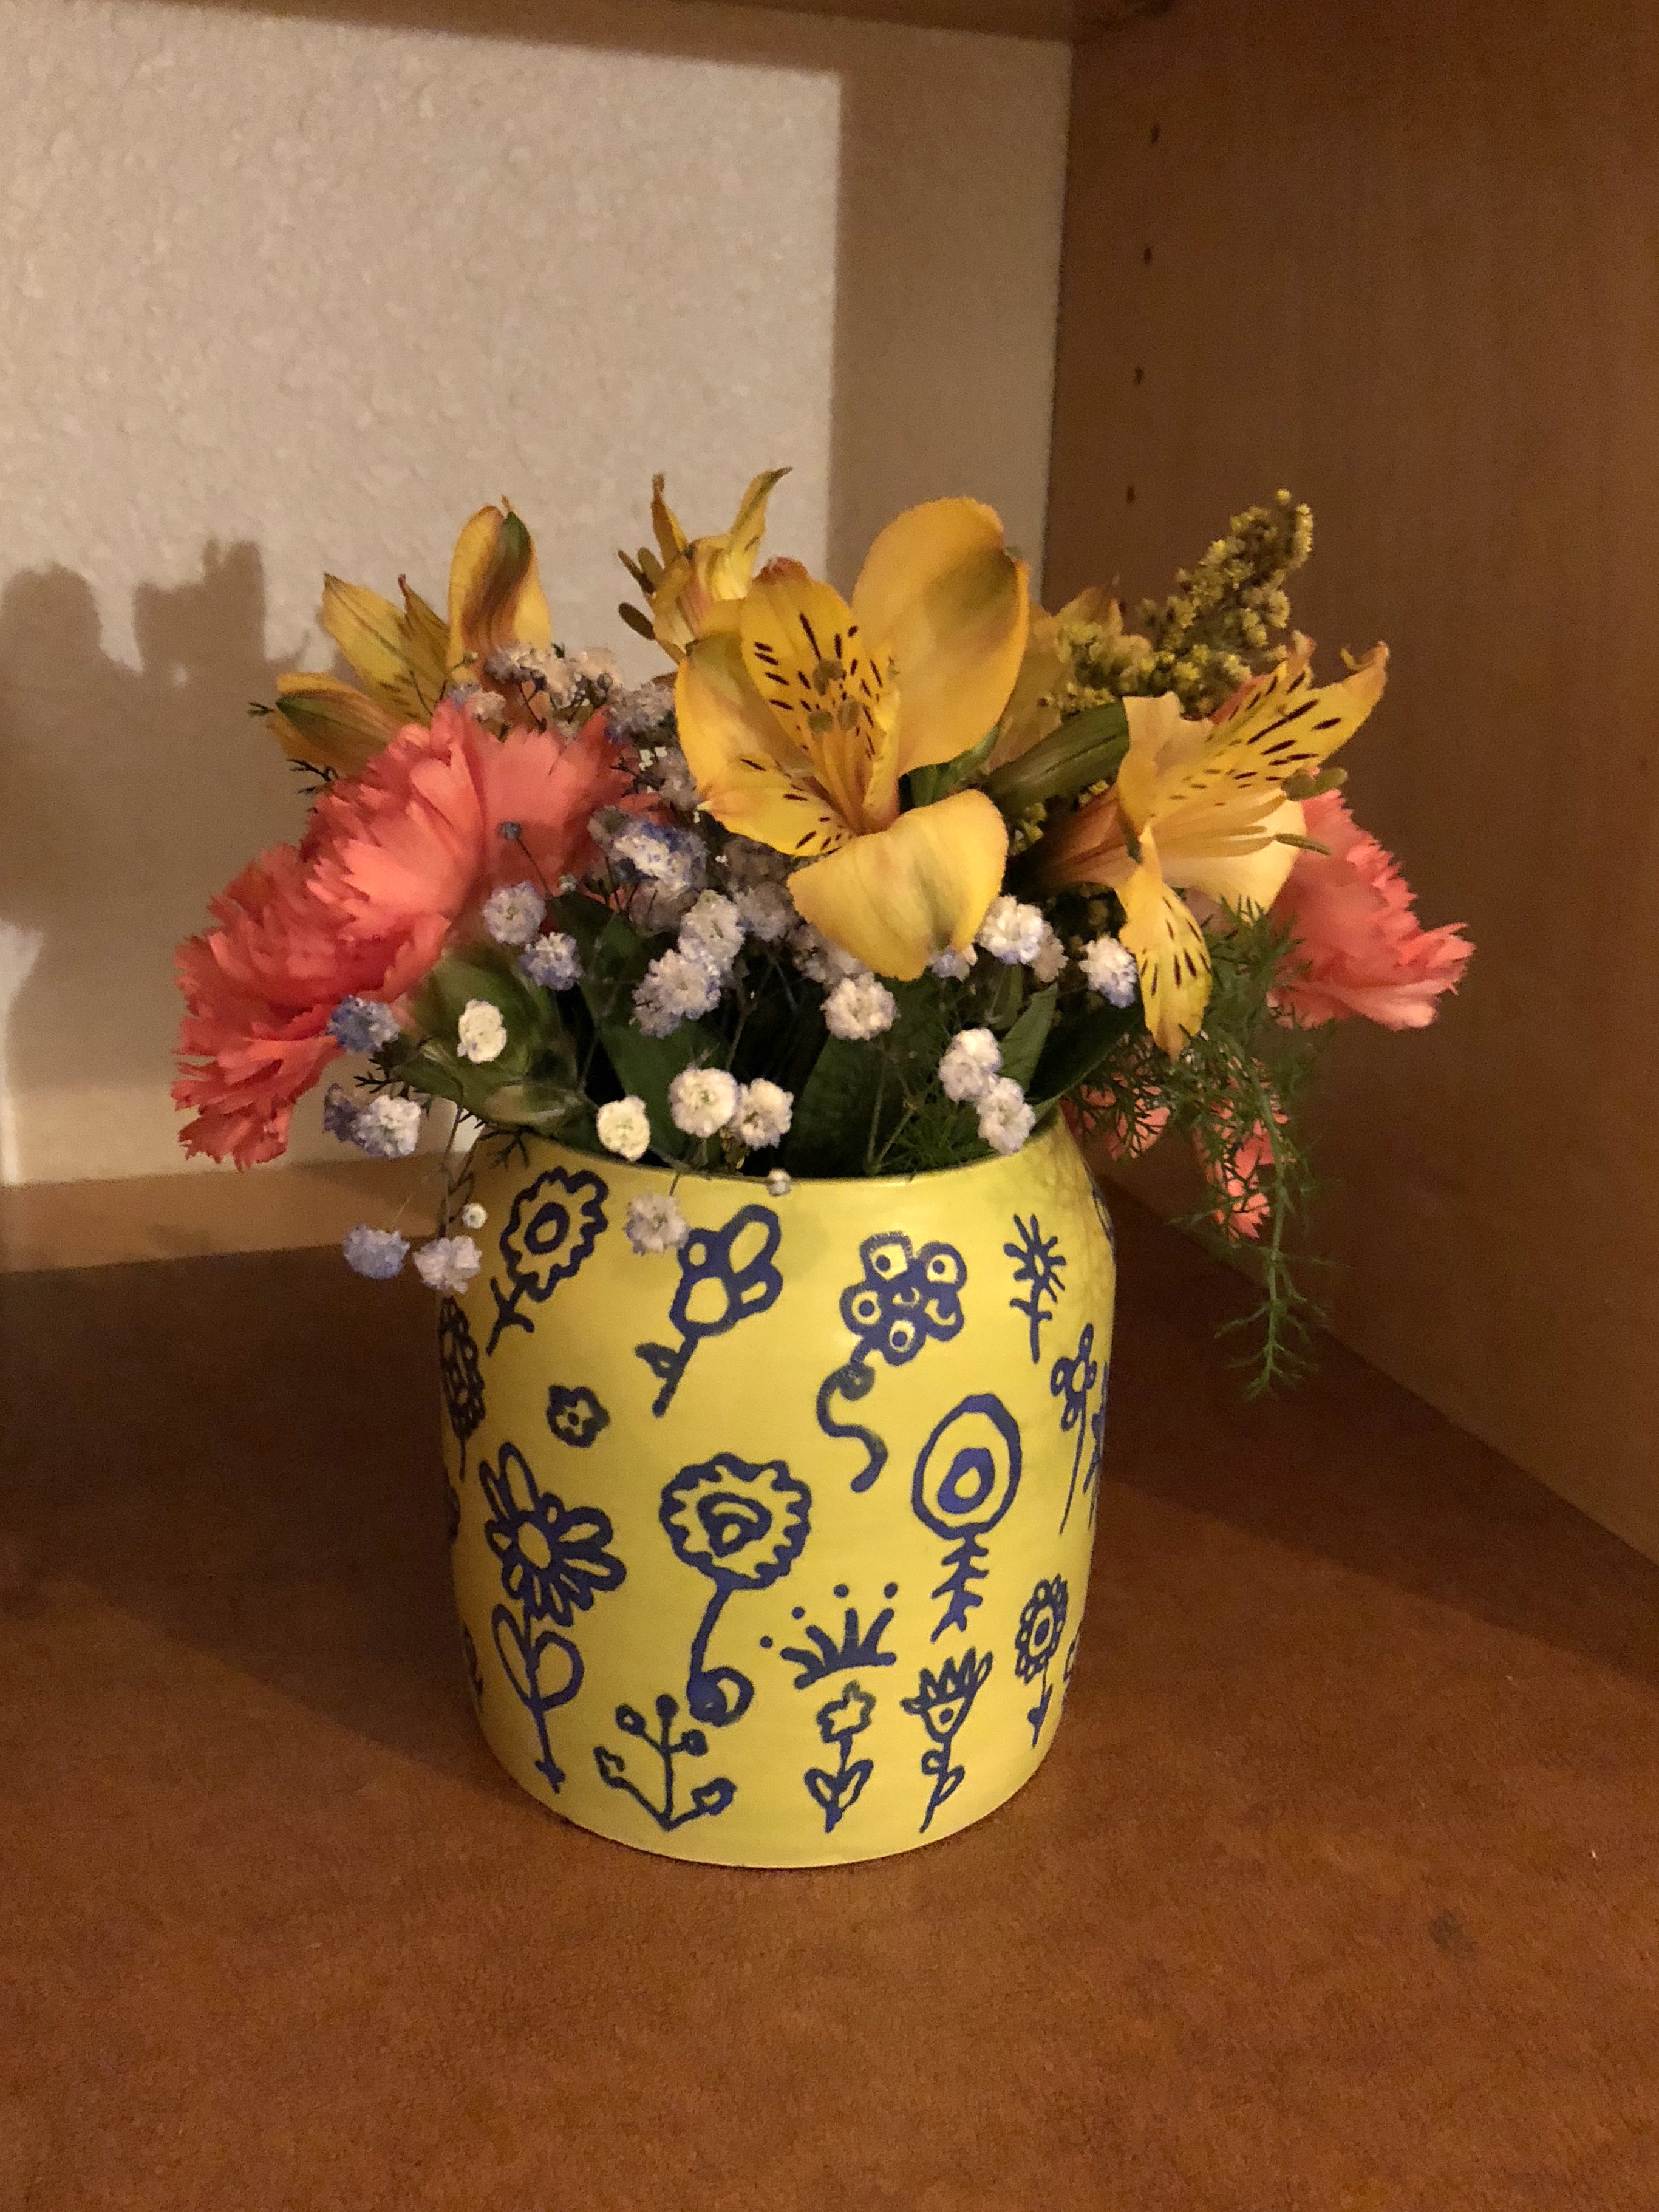 Yellow ceramic vase with drawings on it holding colorful flowers